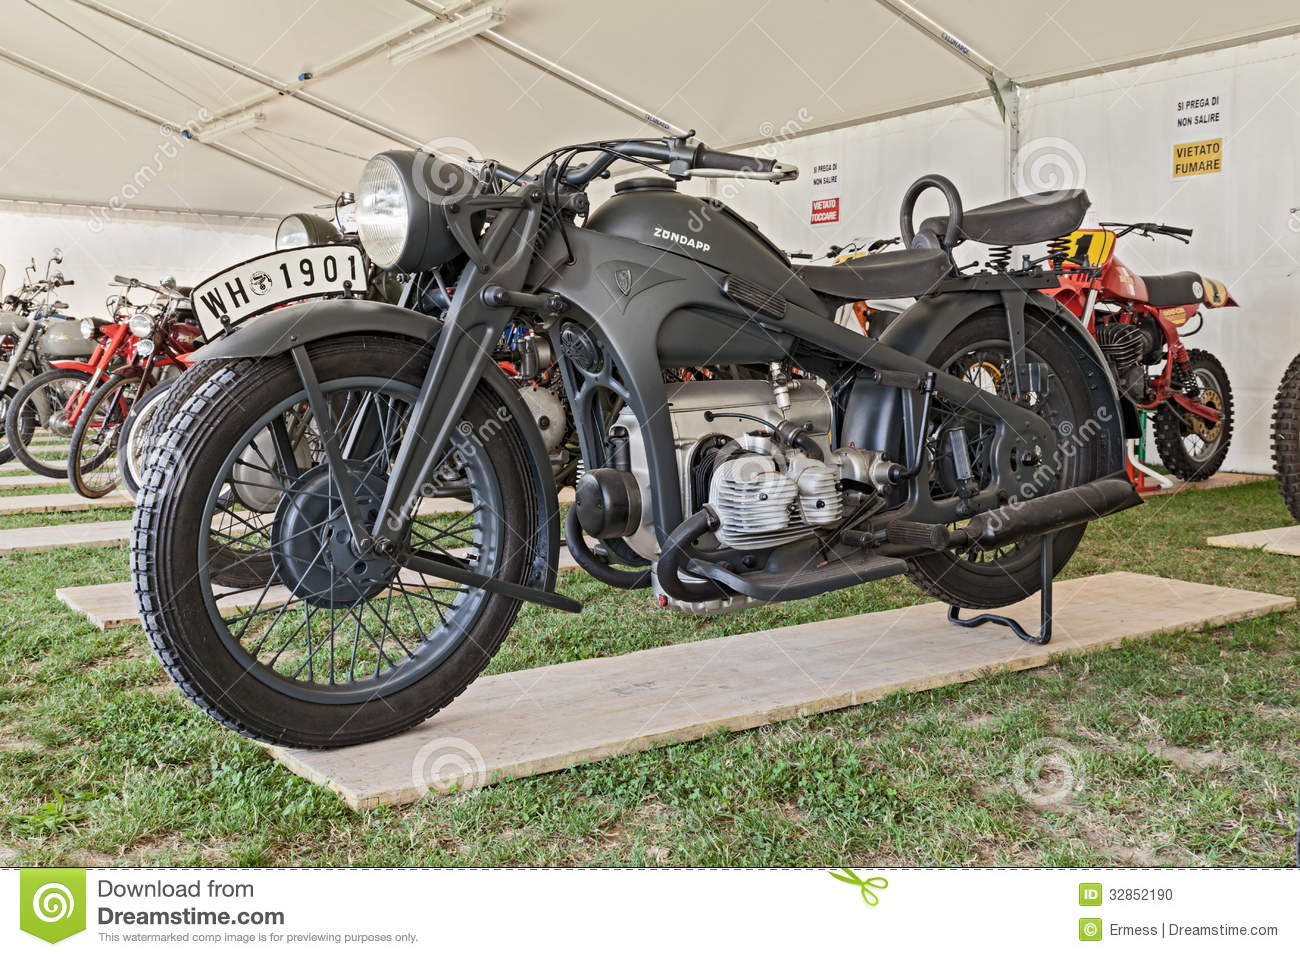  Ks Motorcycle German Army Used Second World War Motorcycle Show    